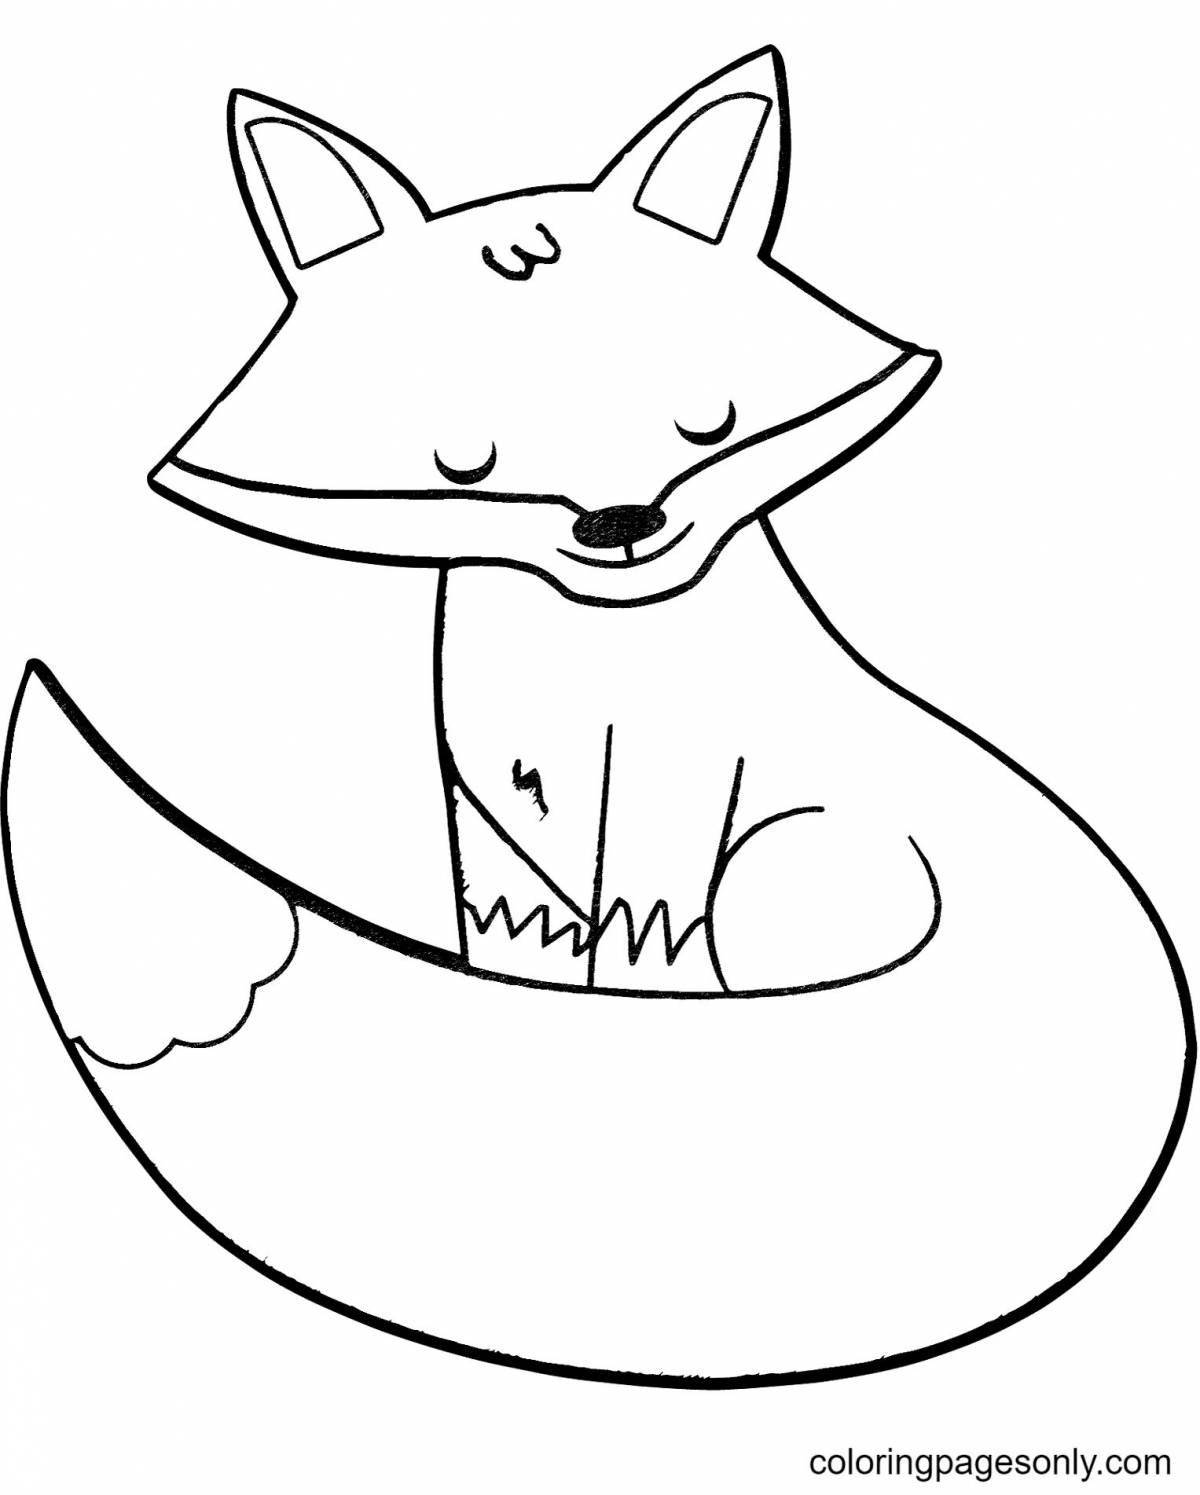 Coloring pages with playful foxes for kids